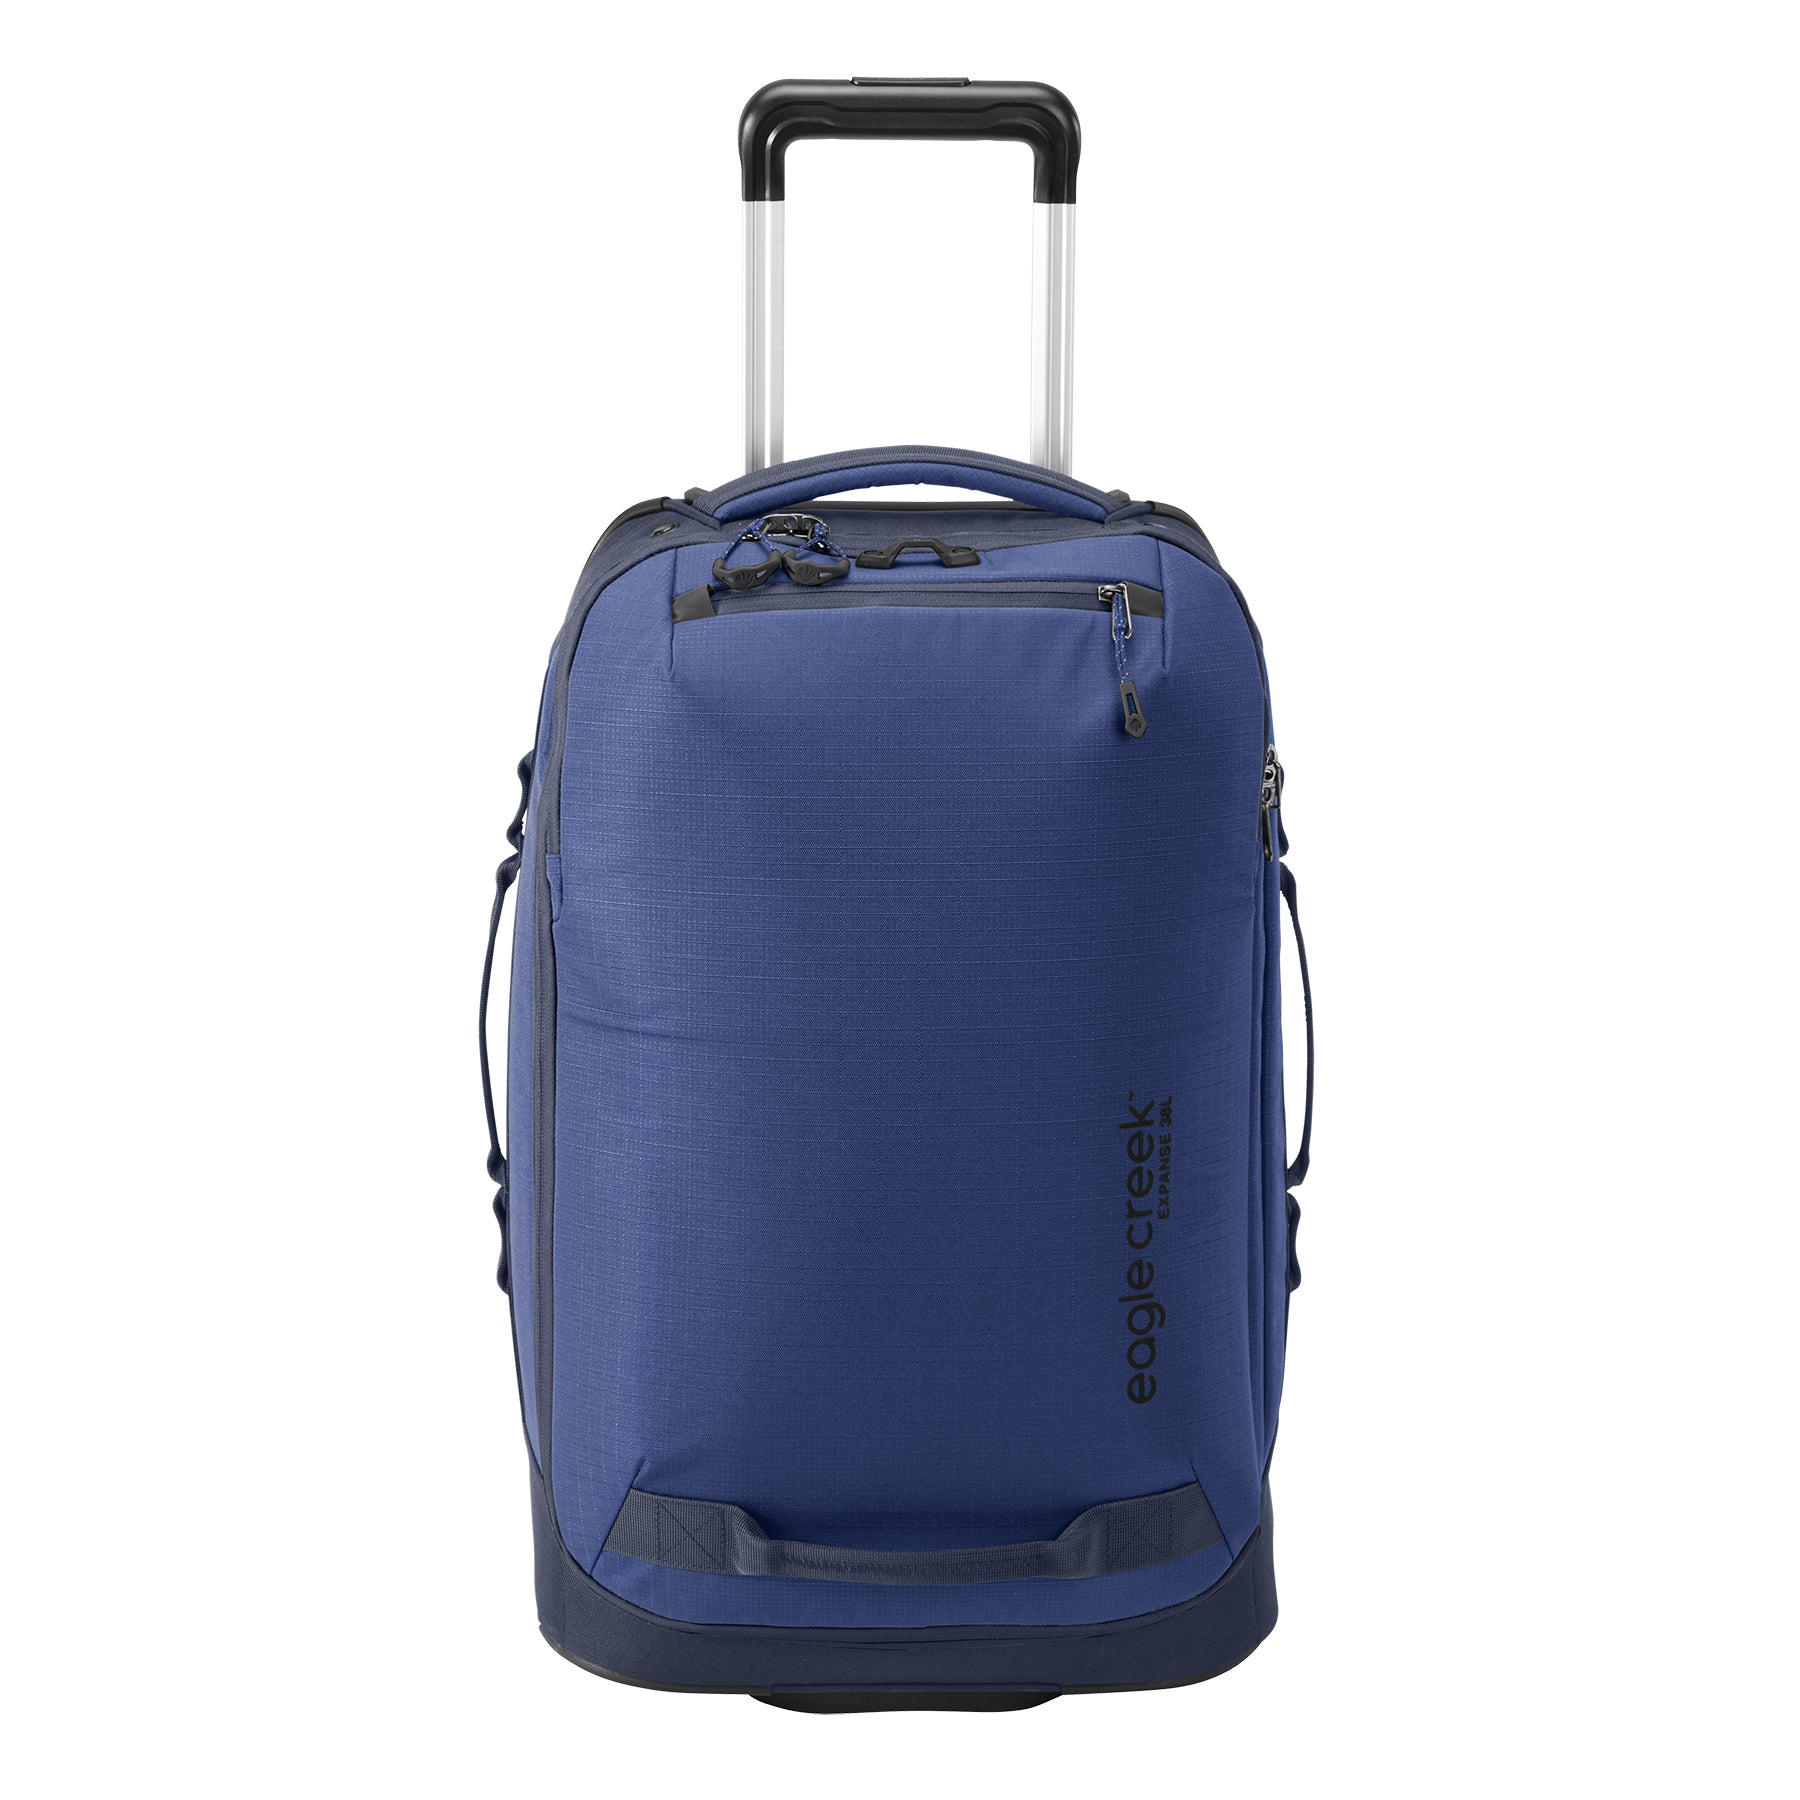 EXPANSE 2-WHEEL 21.25"/35L CONVERTIBLE INTERNATIONAL CARRY ON LUGGAGE